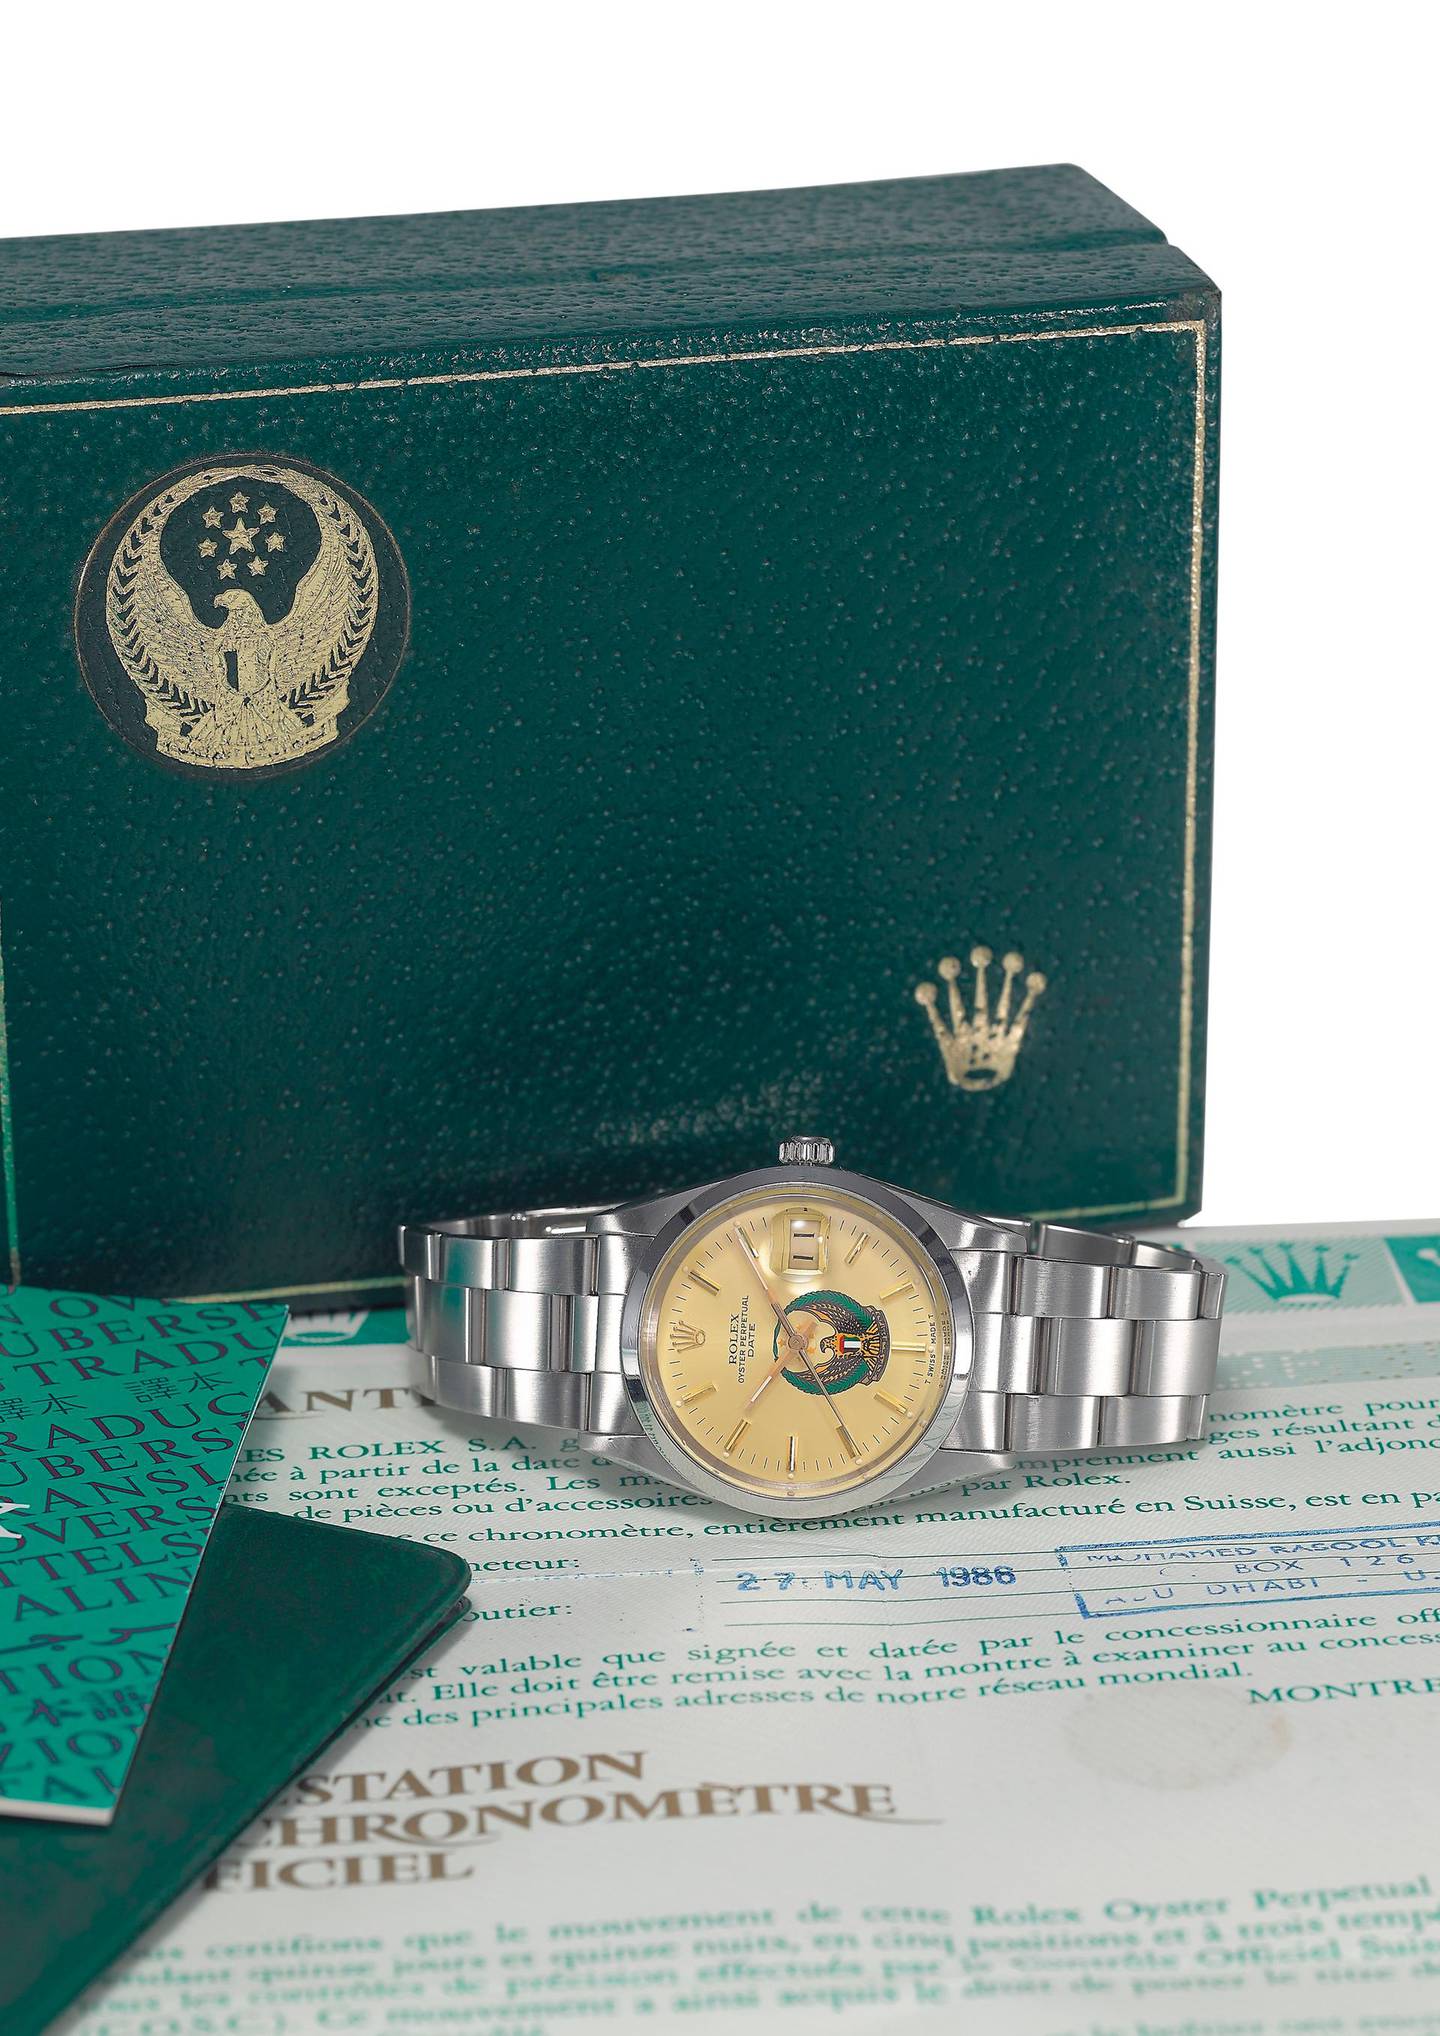 A Rolex Oyster reference made for the UAE armed forces circa 1985. Courtesy Christie's